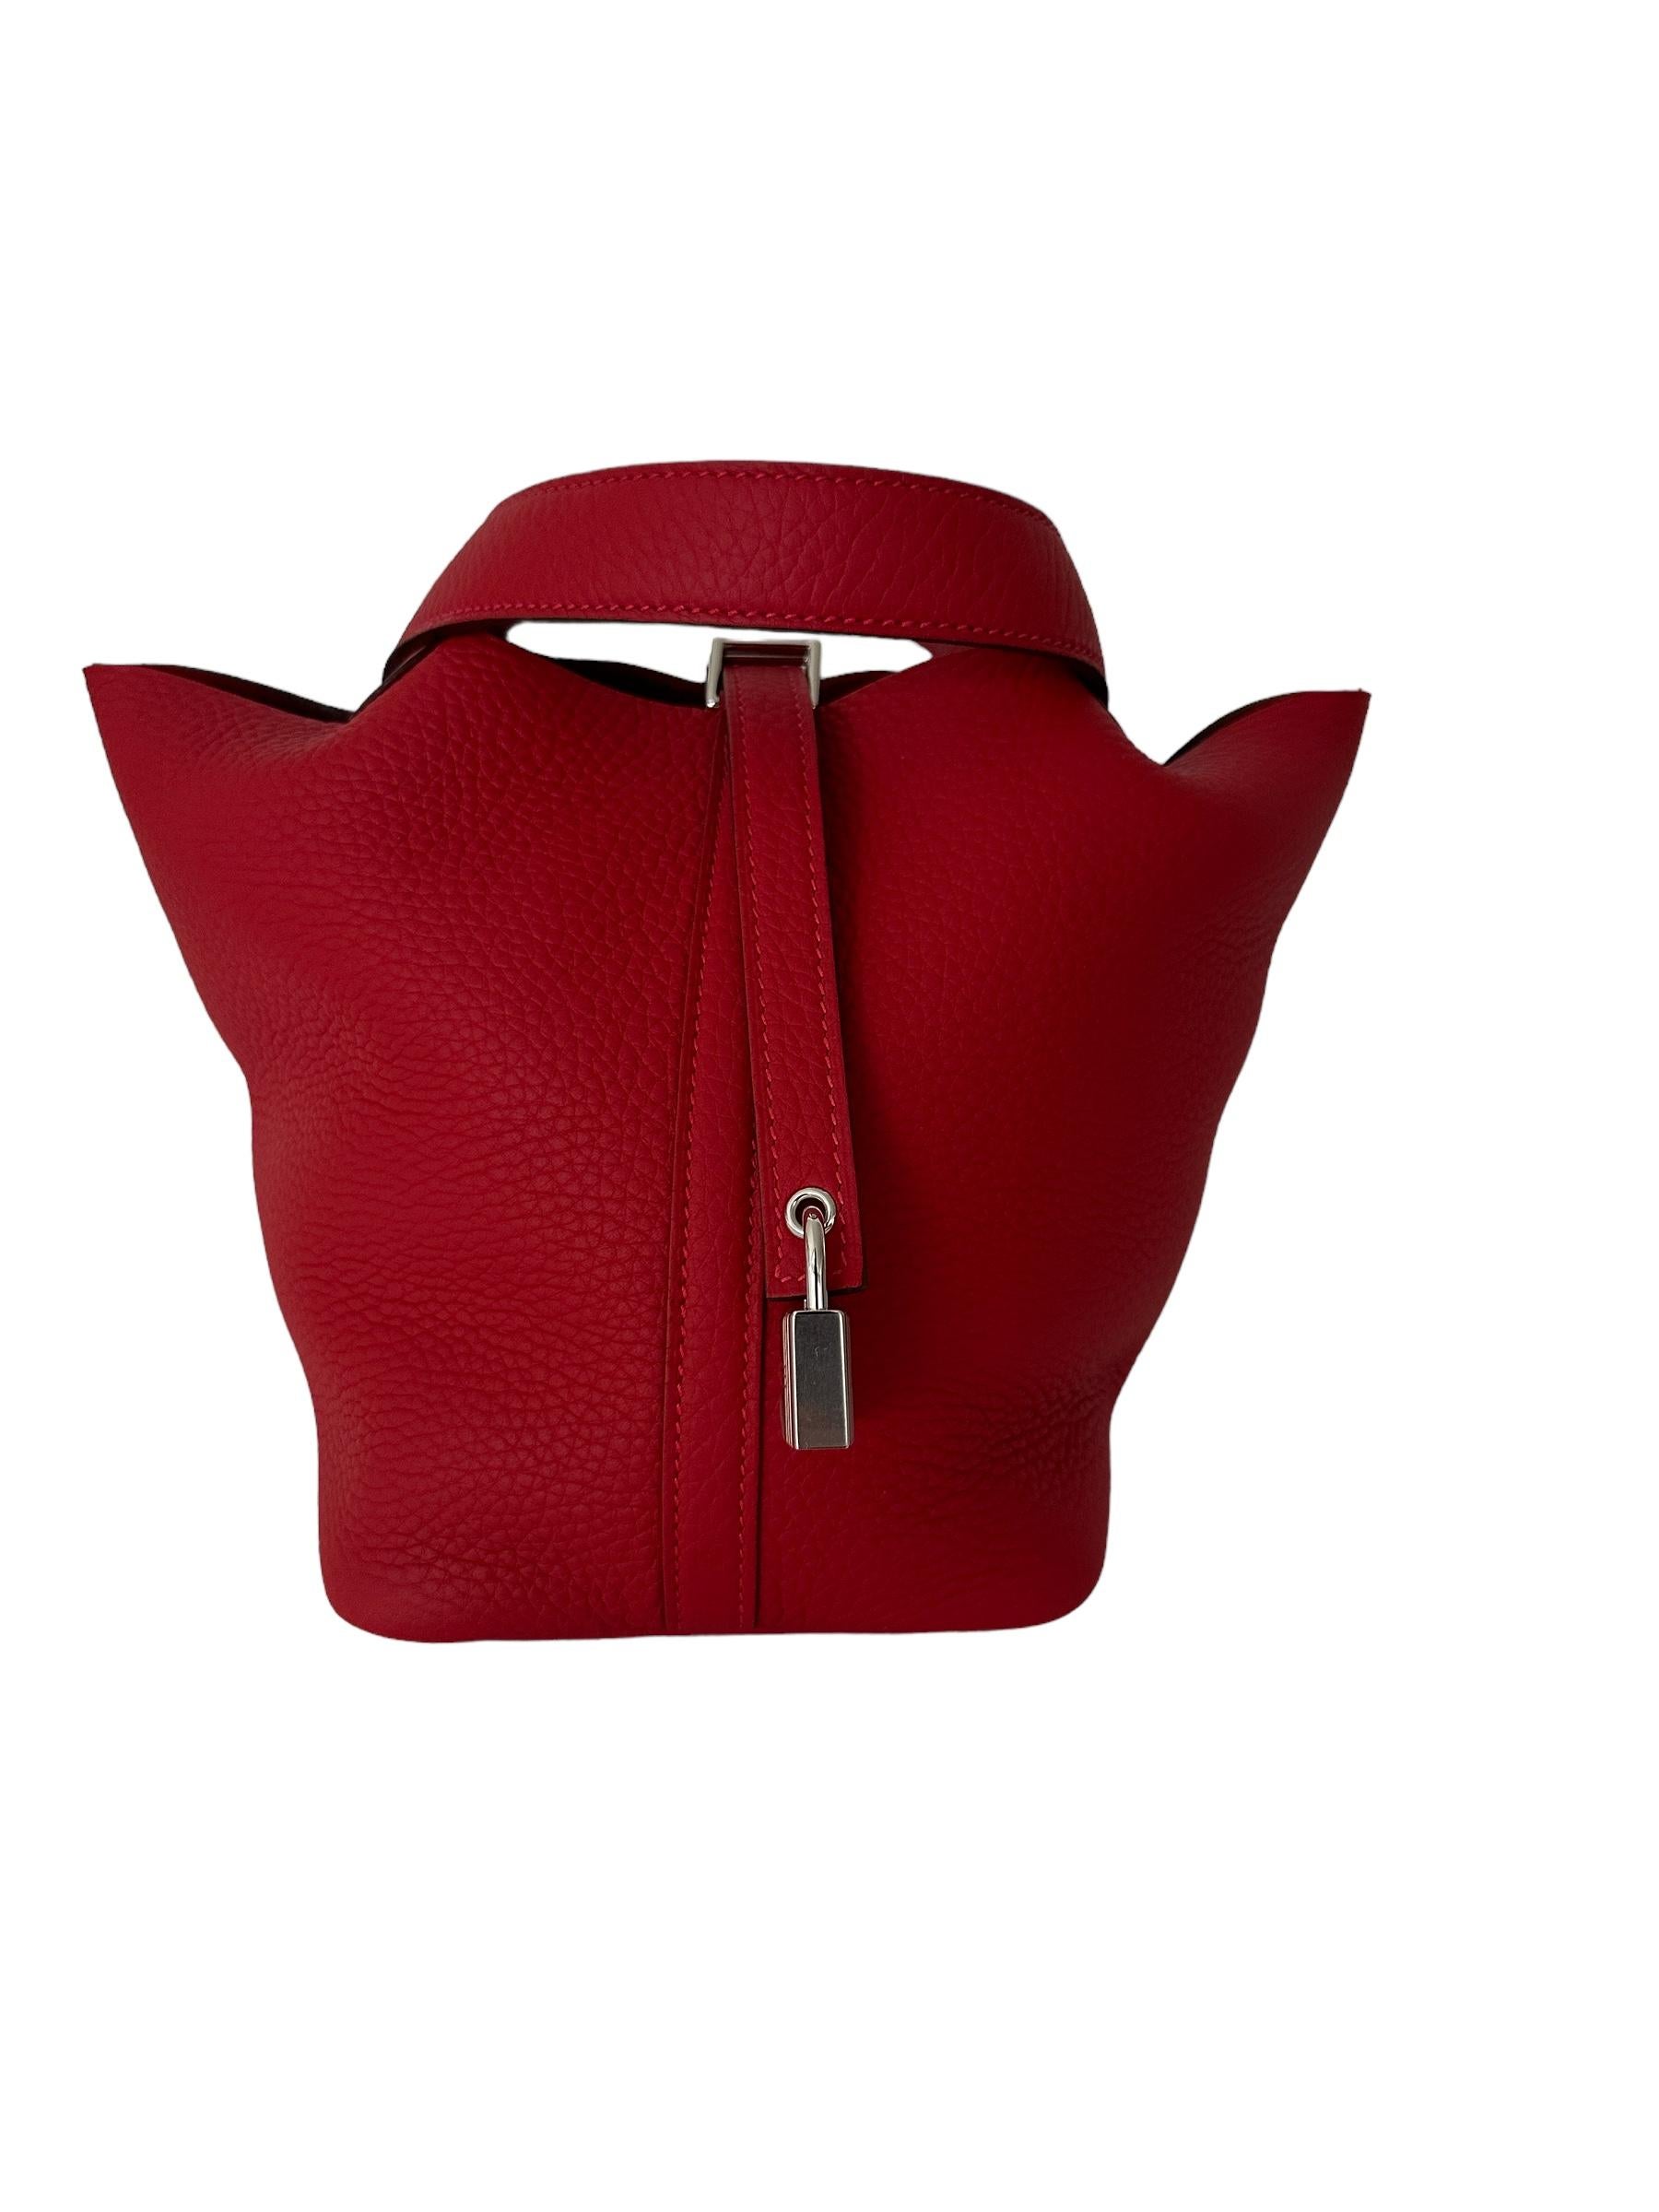 Hermes
Hermes Picotin Lock 18cm of Rouge Vermillion clemence leather with palladium hardware.
Vermillion is a tried and true red Hermes offers
Its a Lipstick Red
Just gorgeous
This Picotin Lock features tonal stitching with two top handles and a